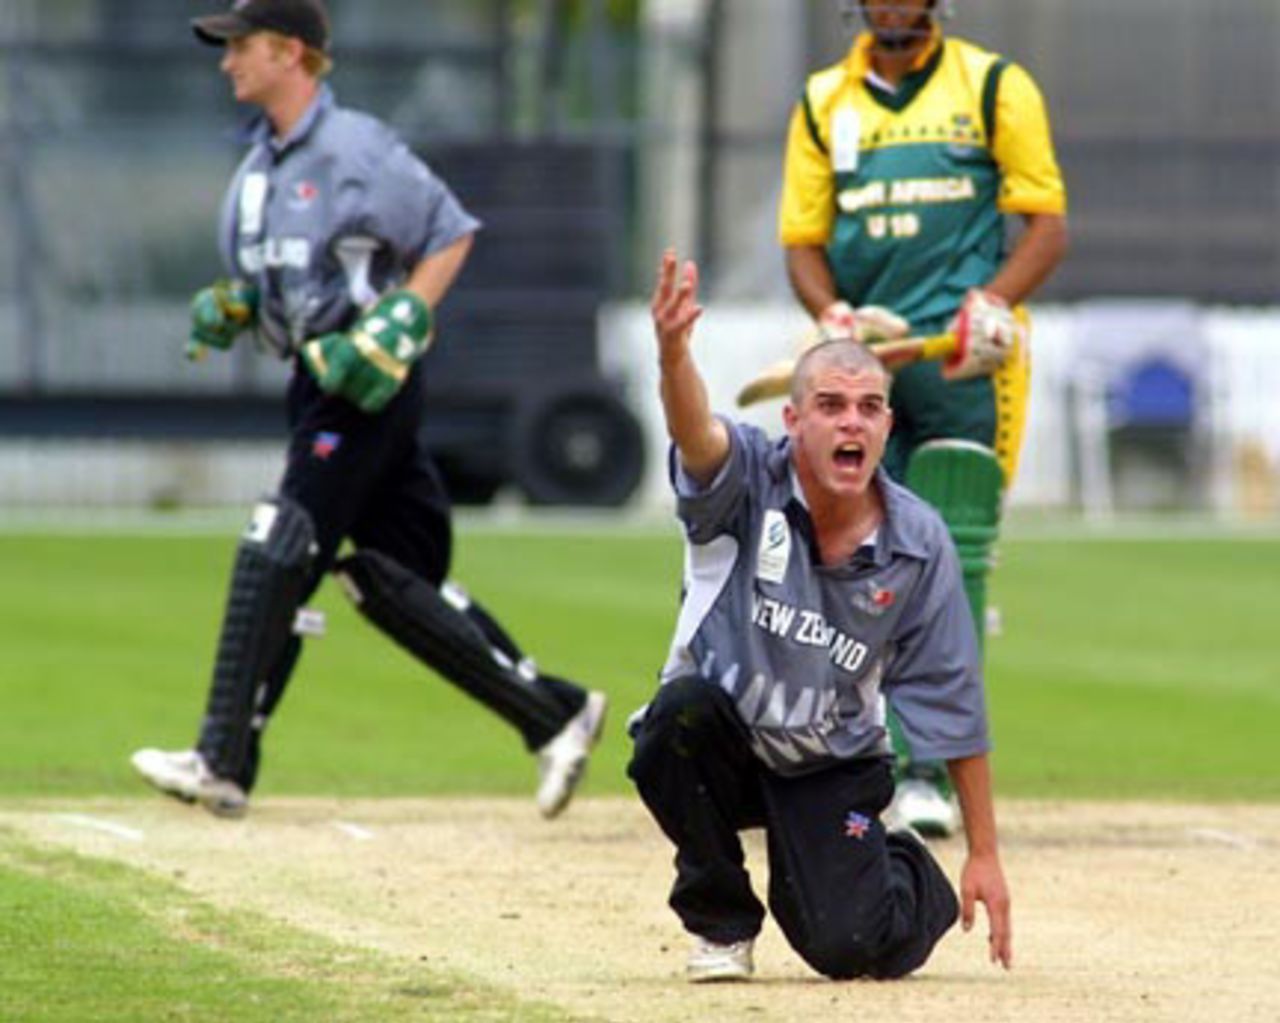 New Zealand Under-19 bowler Peter Borren unsuccessfully appeals for lbw against South Africa Under-19 batsman Hashim Amla during his spell of 3-34 from 10 overs. Wicket-keeper Ian Sandbrook follows the path of the ball in the background. ICC Under-19 World Cup Super League Group 2: New Zealand Under-19s v South Africa Under-19s at Lincoln Green, Lincoln, 30 January 2002.